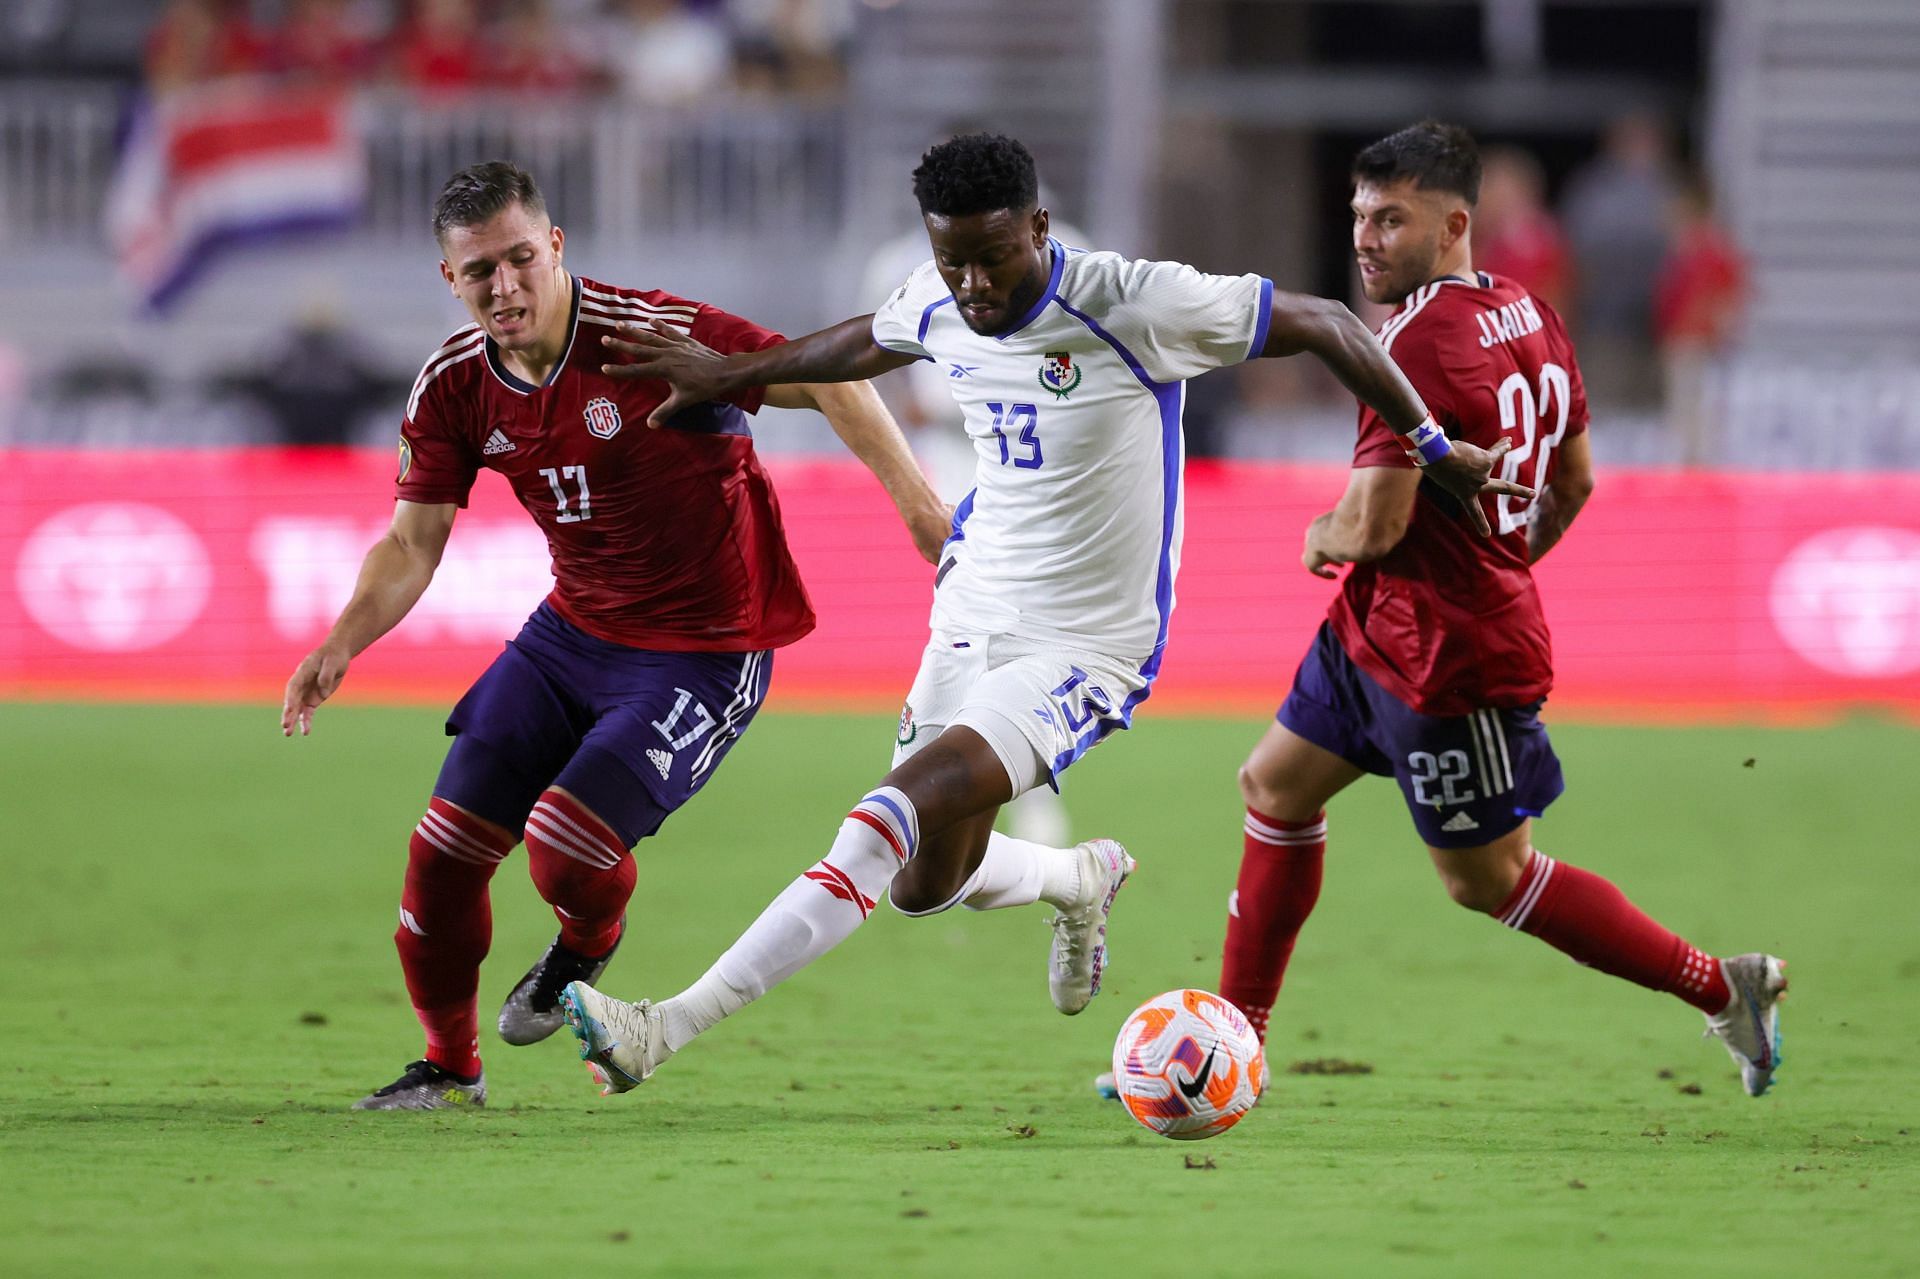 Costa Rica v Panama: Group C - 2023 Concacaf Gold Cup